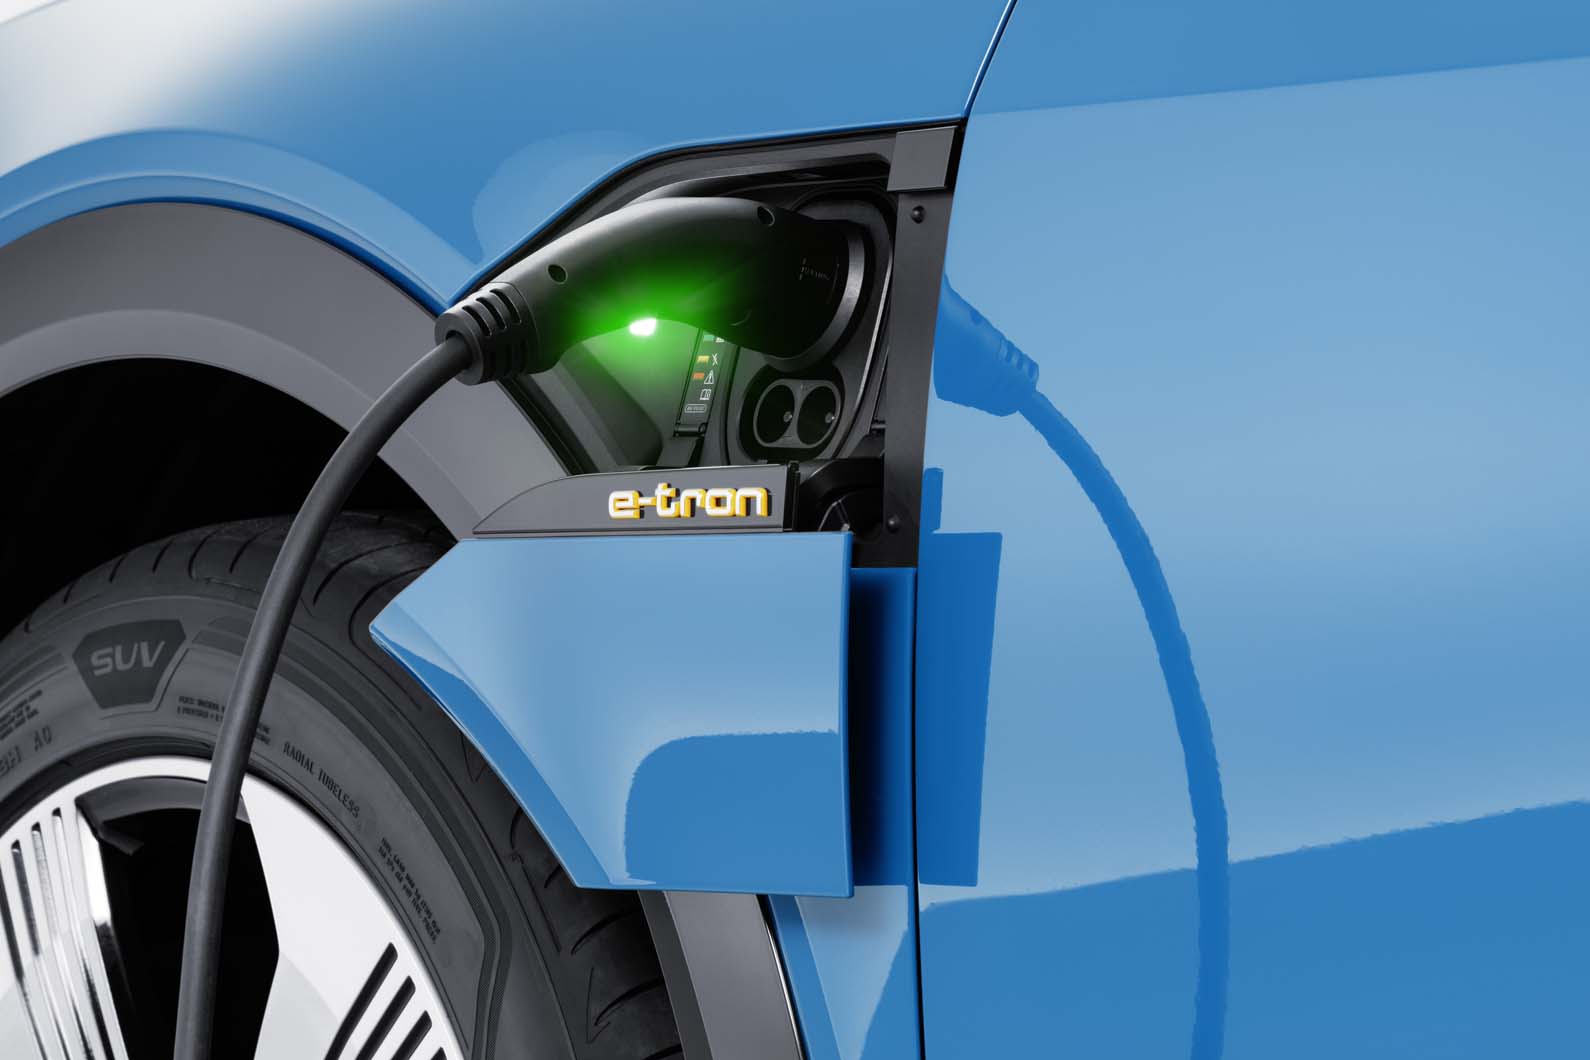 Audi: 12-minute fast charging of electric vehicles from 2020